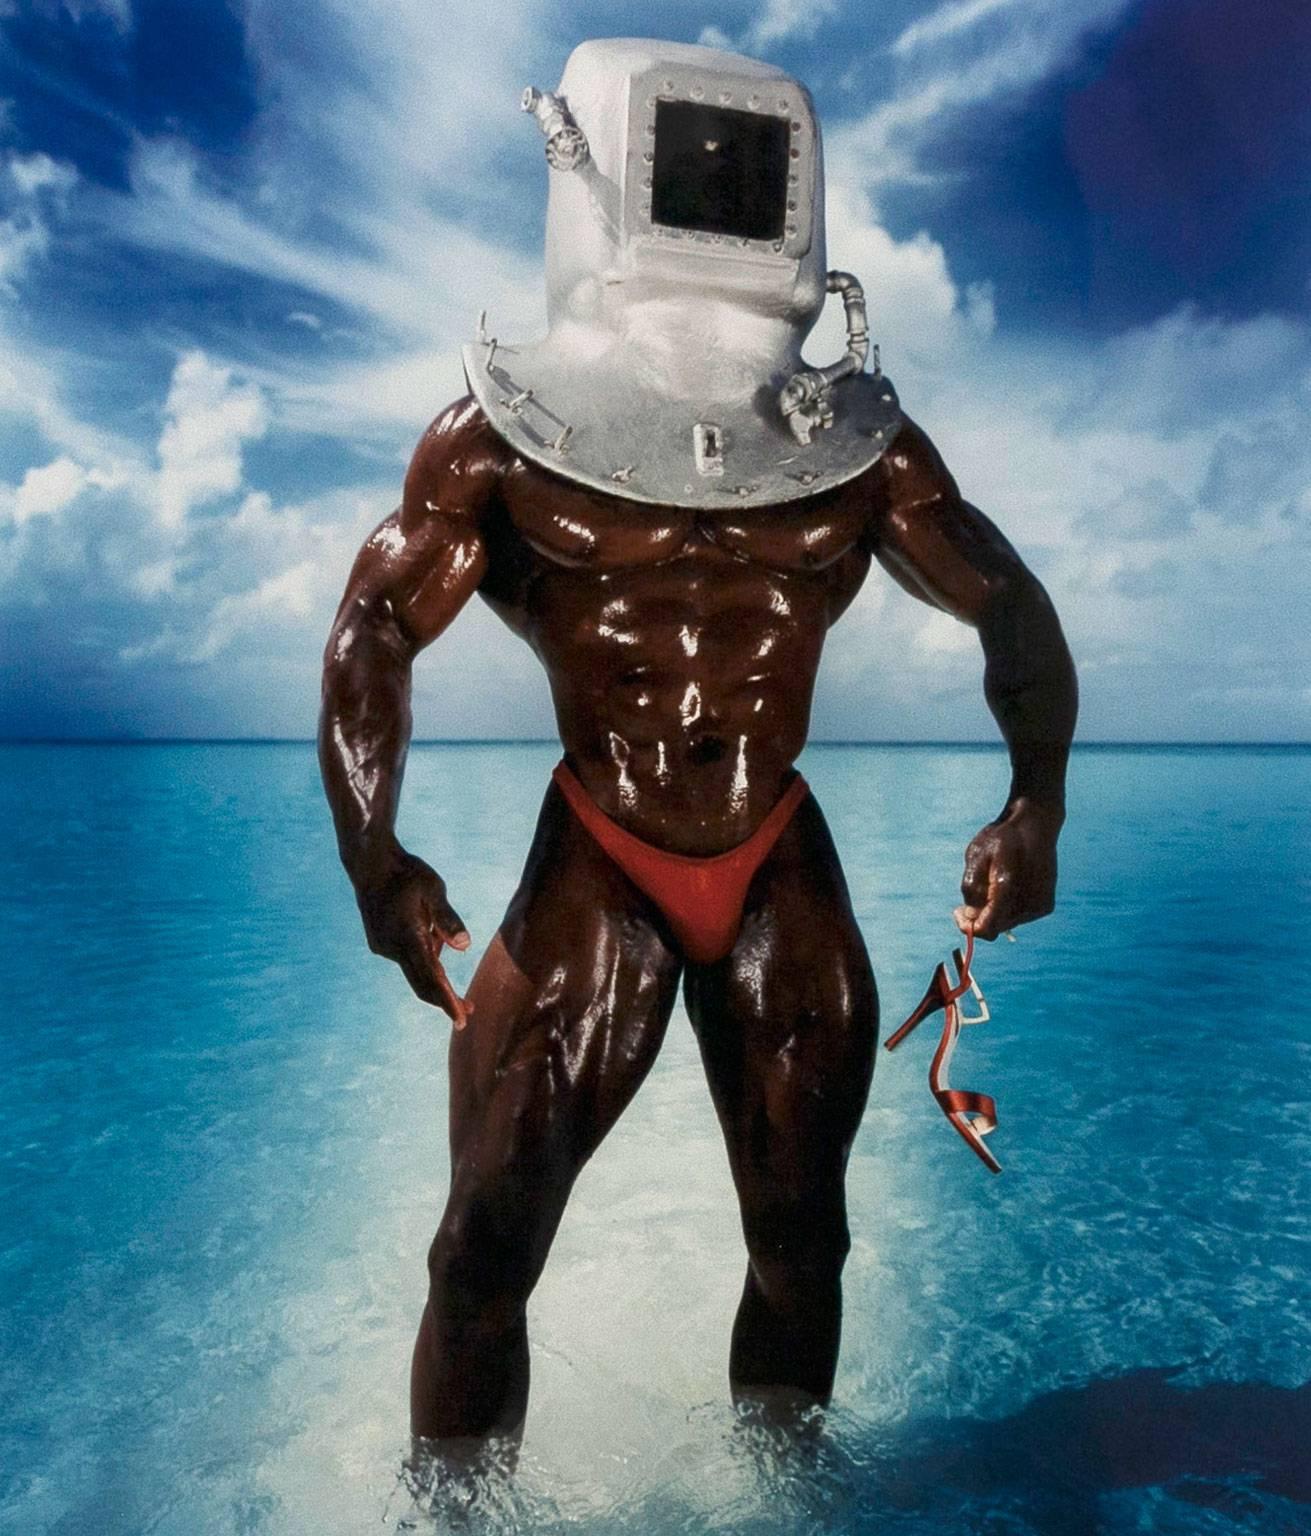 Man With Diving Bell - Photograph by David LaChapelle